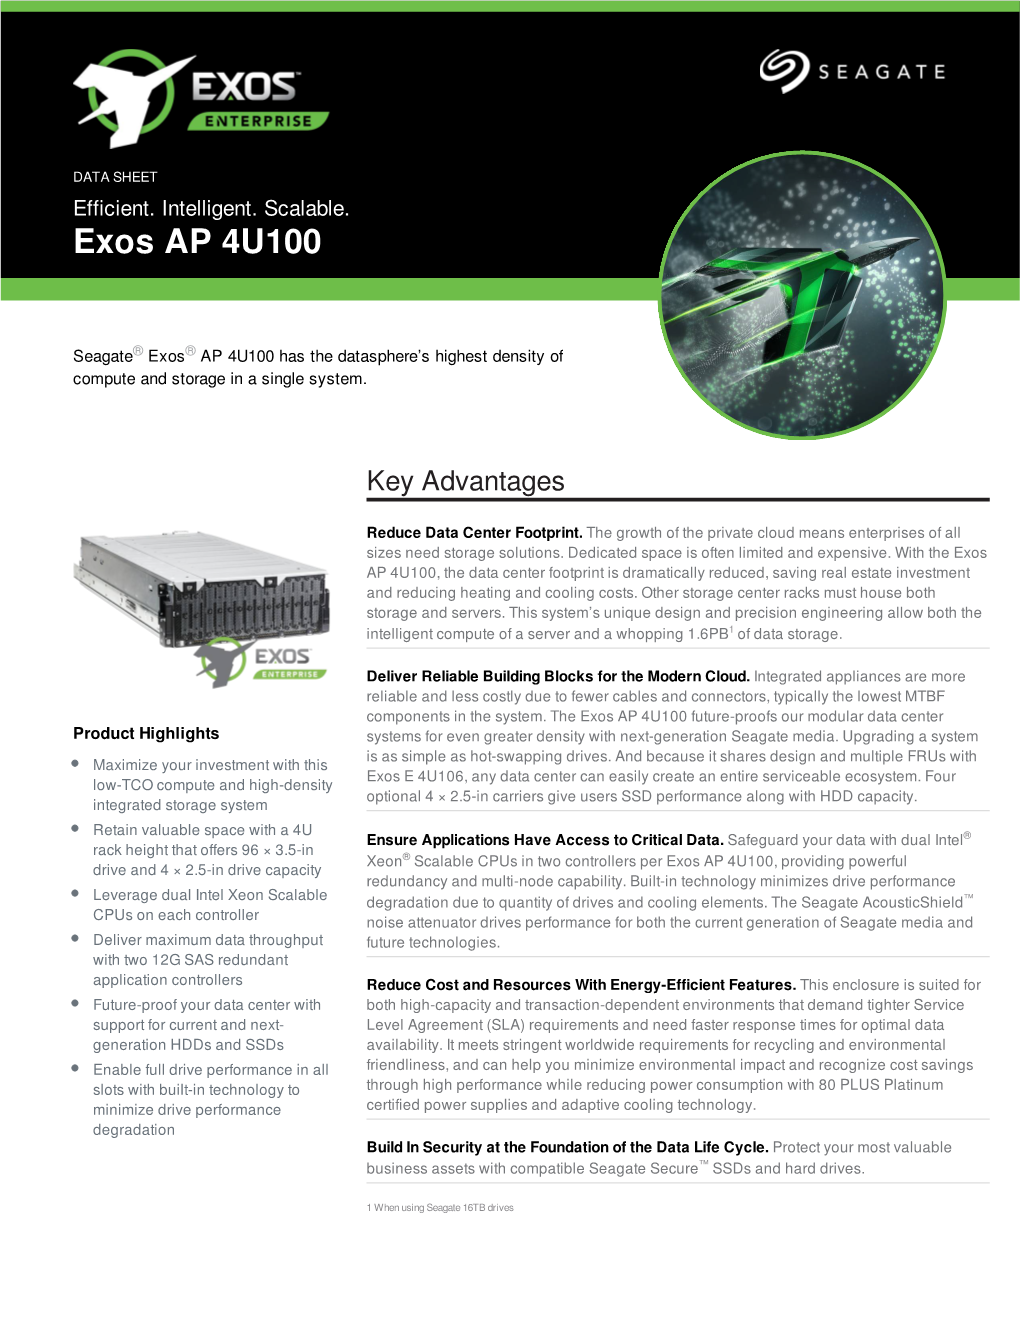 Seagate® Exos® AP 4U100 Has the Datasphere’S Highest Density of Compute and Storage in a Single System